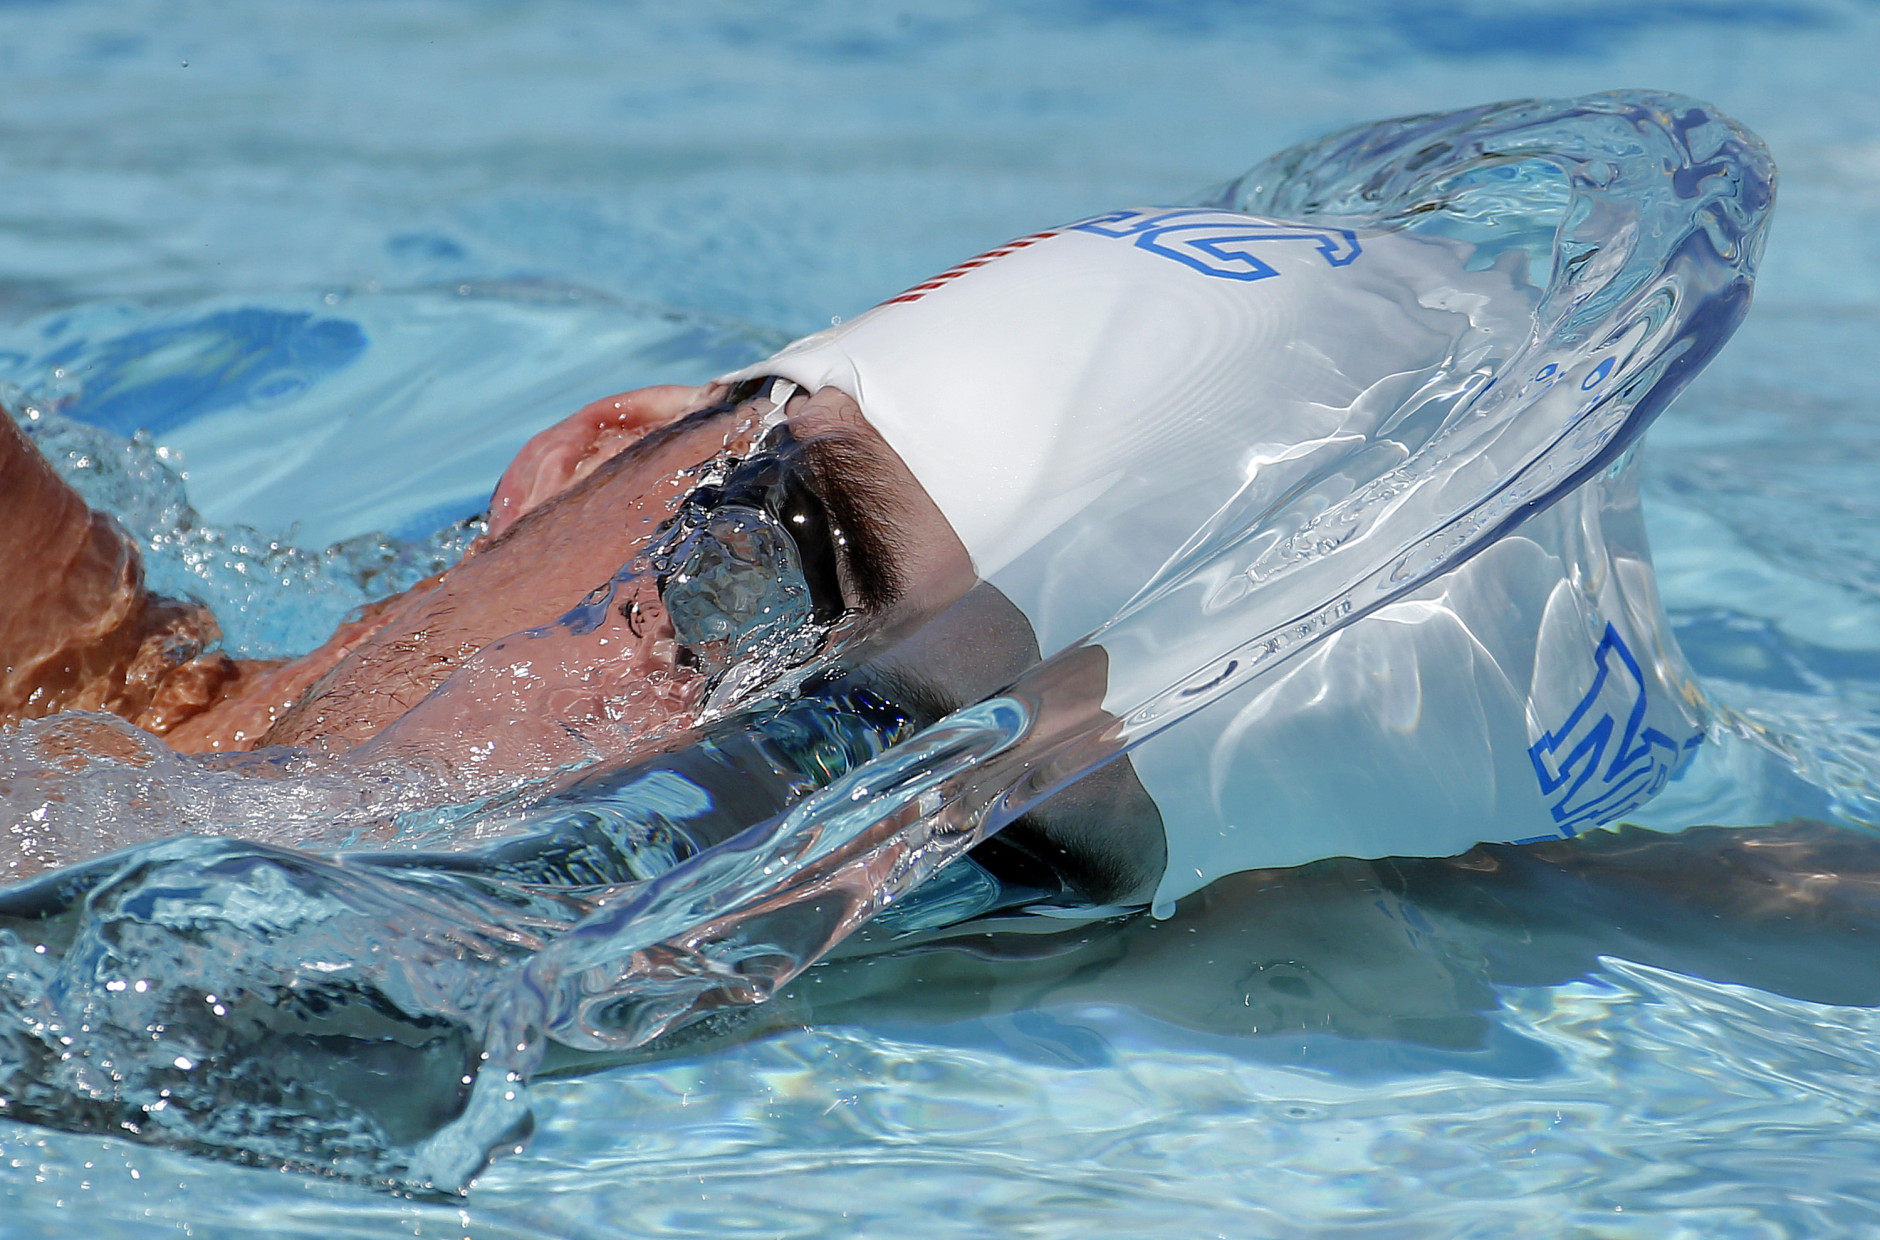 FOR USE AS DESIRED, YEAR END PHOTOS - FILE - Michael Phelps warms up prior to a 50-meter freestyle preliminary heat at the Arena Grand Prix swim event, Friday, April 25, 2014, in Mesa, Ariz. It is Phelps' second competitive event after a nearly two-year retirement. (AP Photo/Matt York, File)